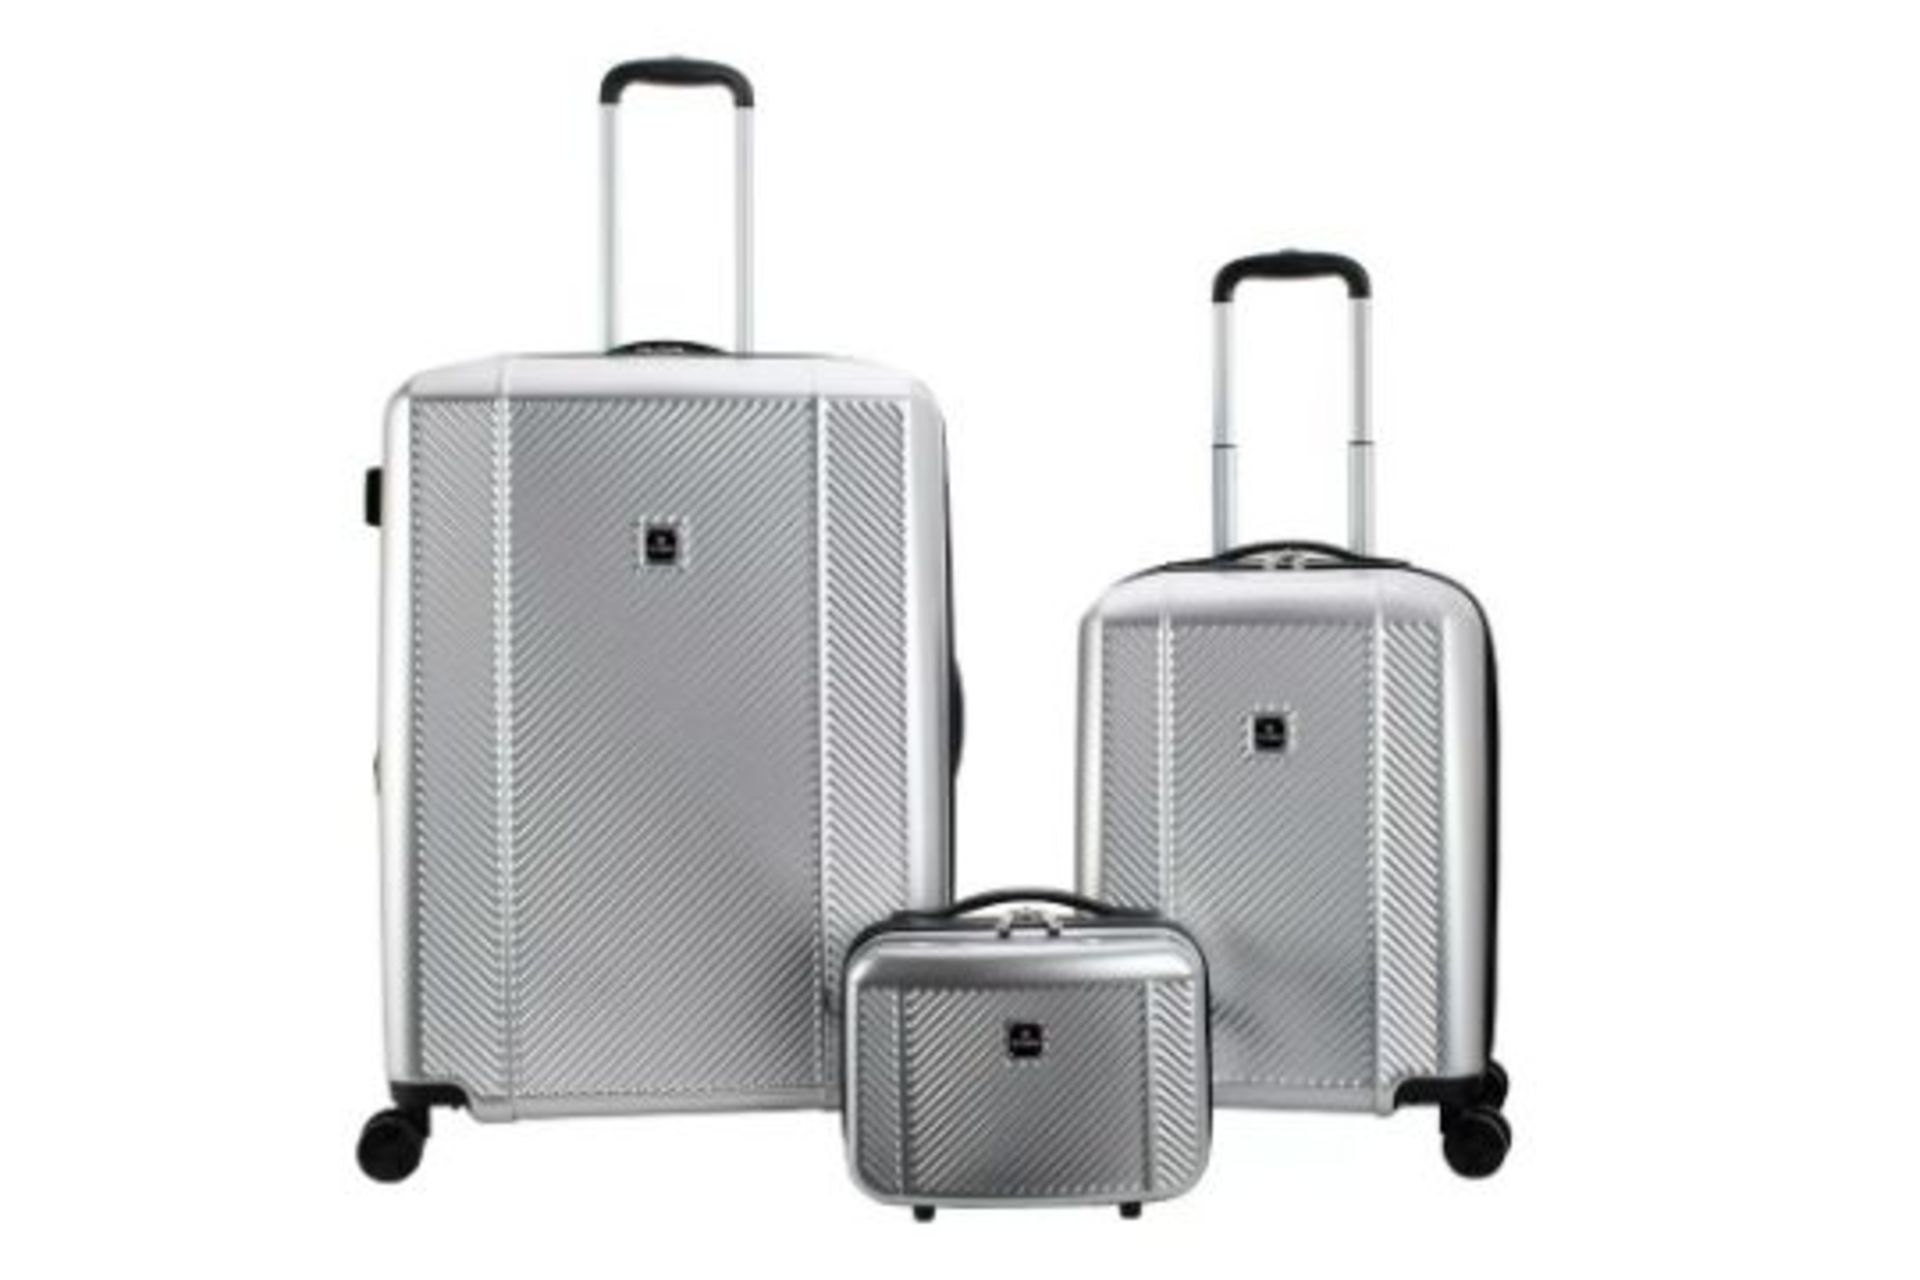 3 x New Boxed 3 Piece Sets of TAG Spectrum Hardside Luggage Set. (SILVER). RRP £199.99 per set. - Image 3 of 3